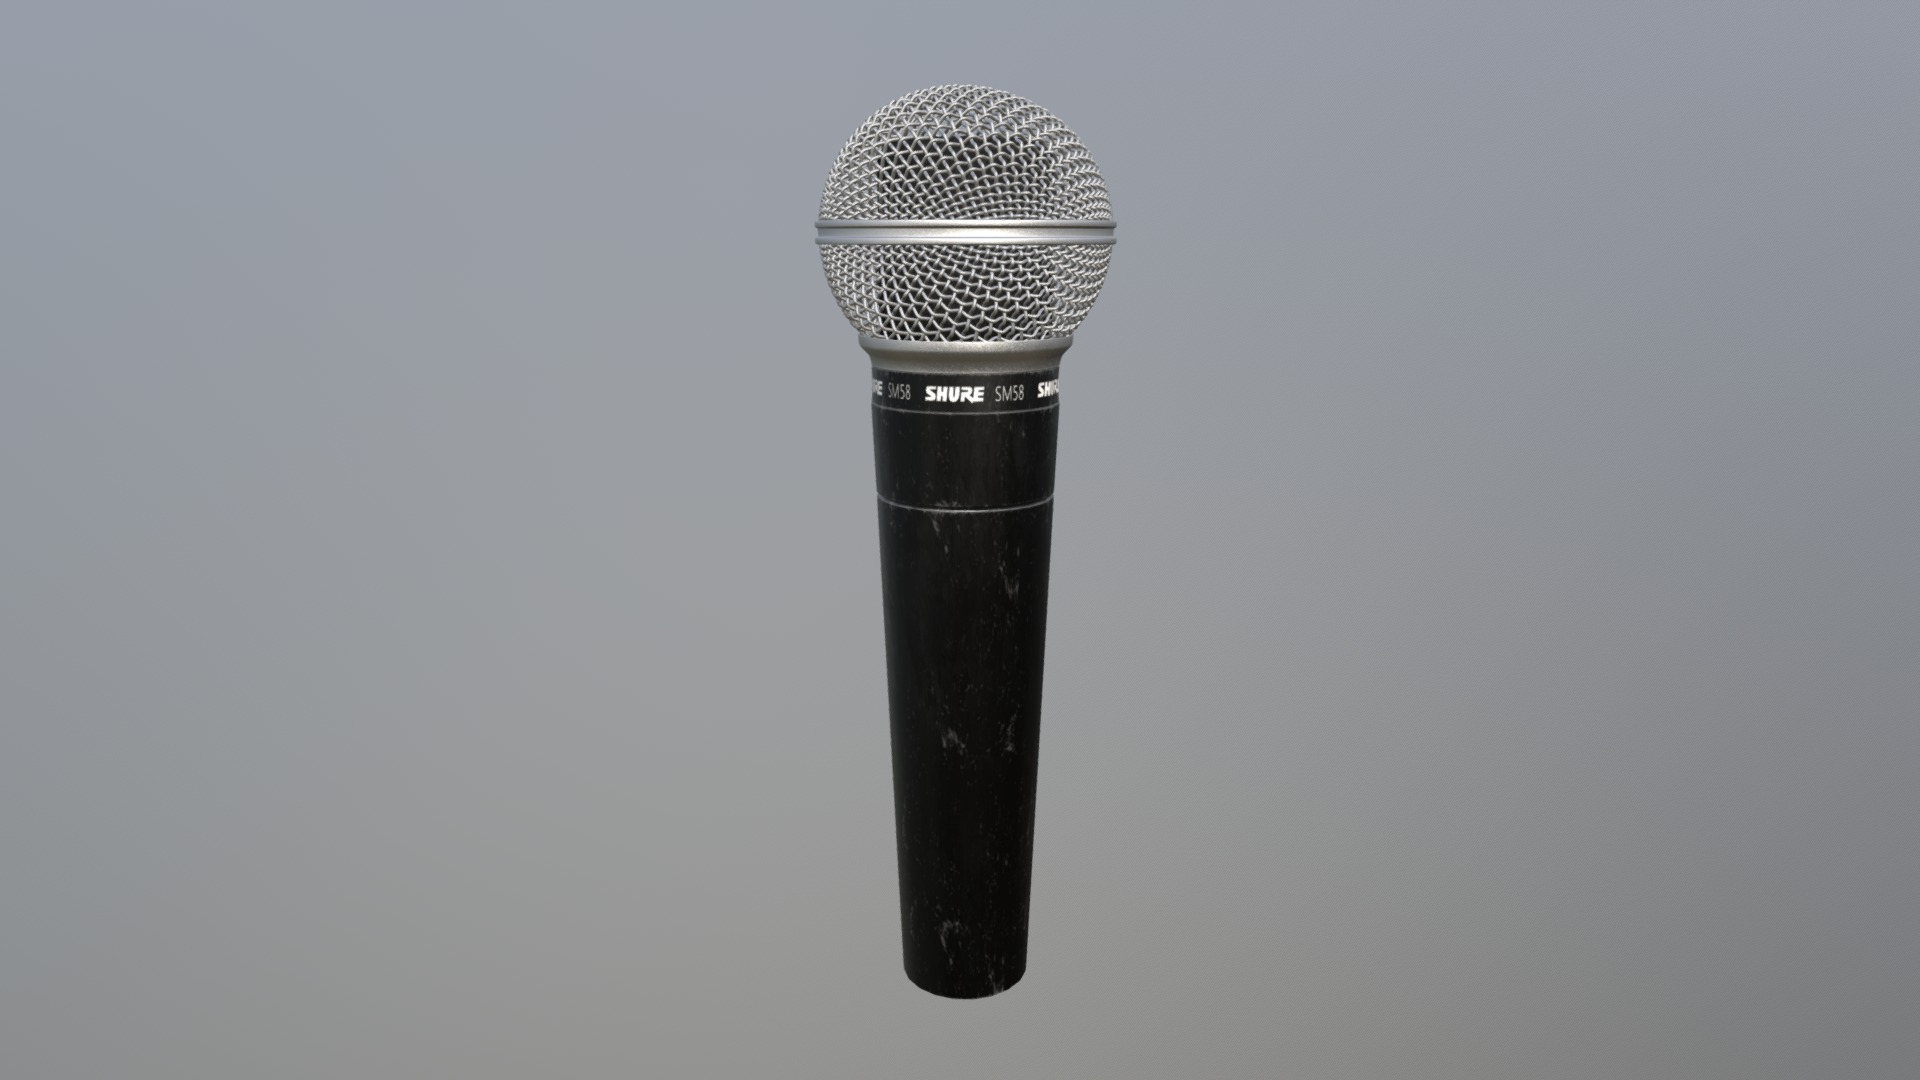 3D model Shure SM58 Microphone - This is a 3D model of the Shure SM58 Microphone. The 3D model is about a black and silver microphone.